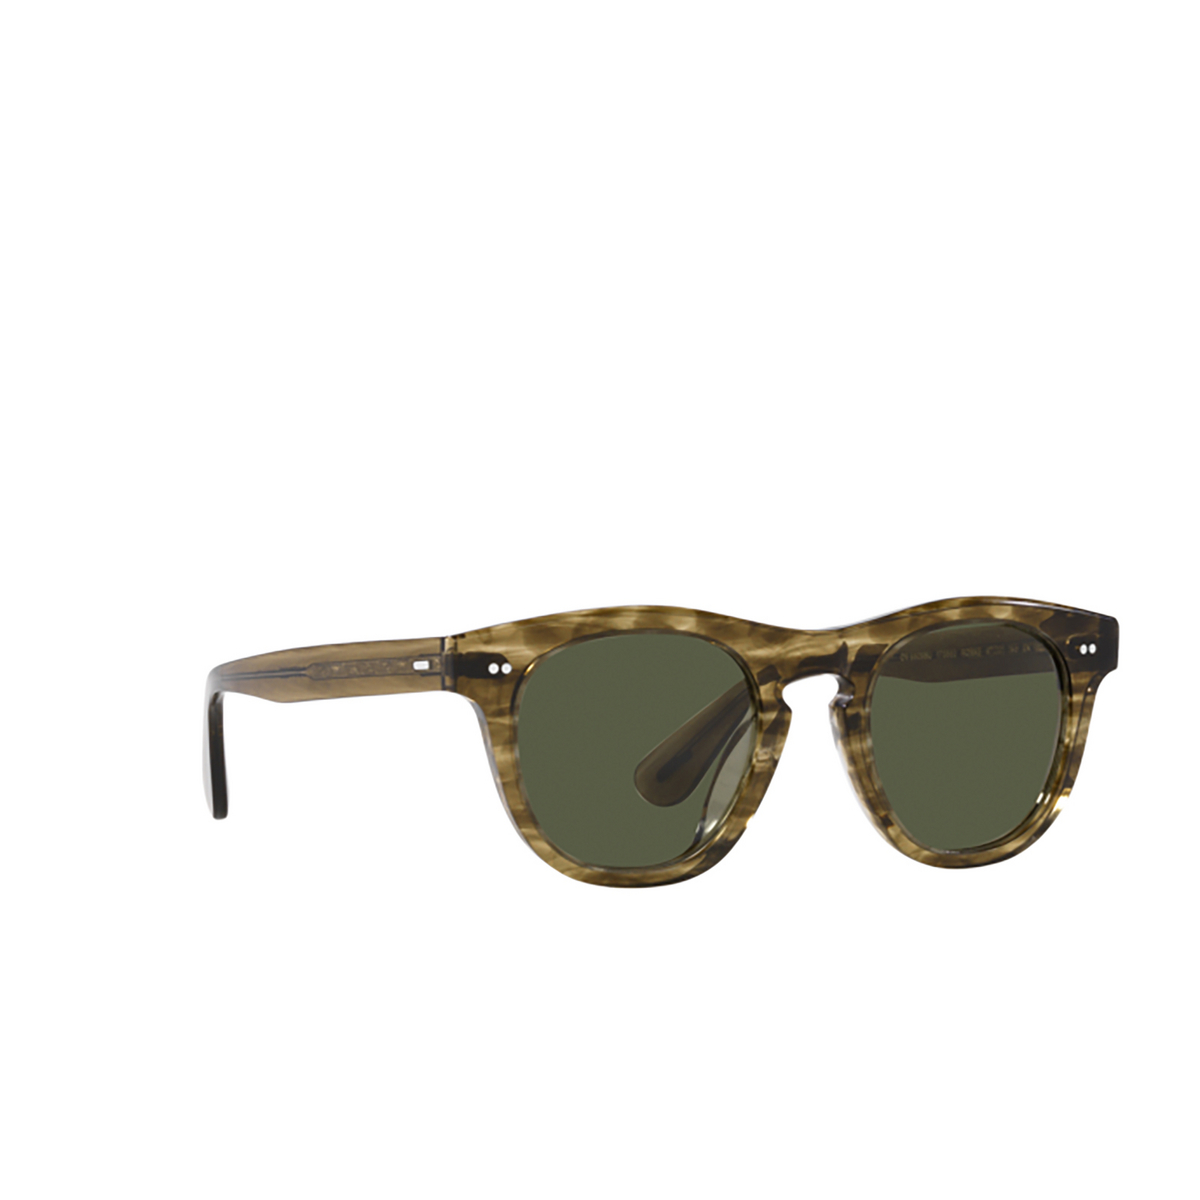 Oliver Peoples RORKE Sunglasses 173552 Soft Olive Gradient - three-quarters view